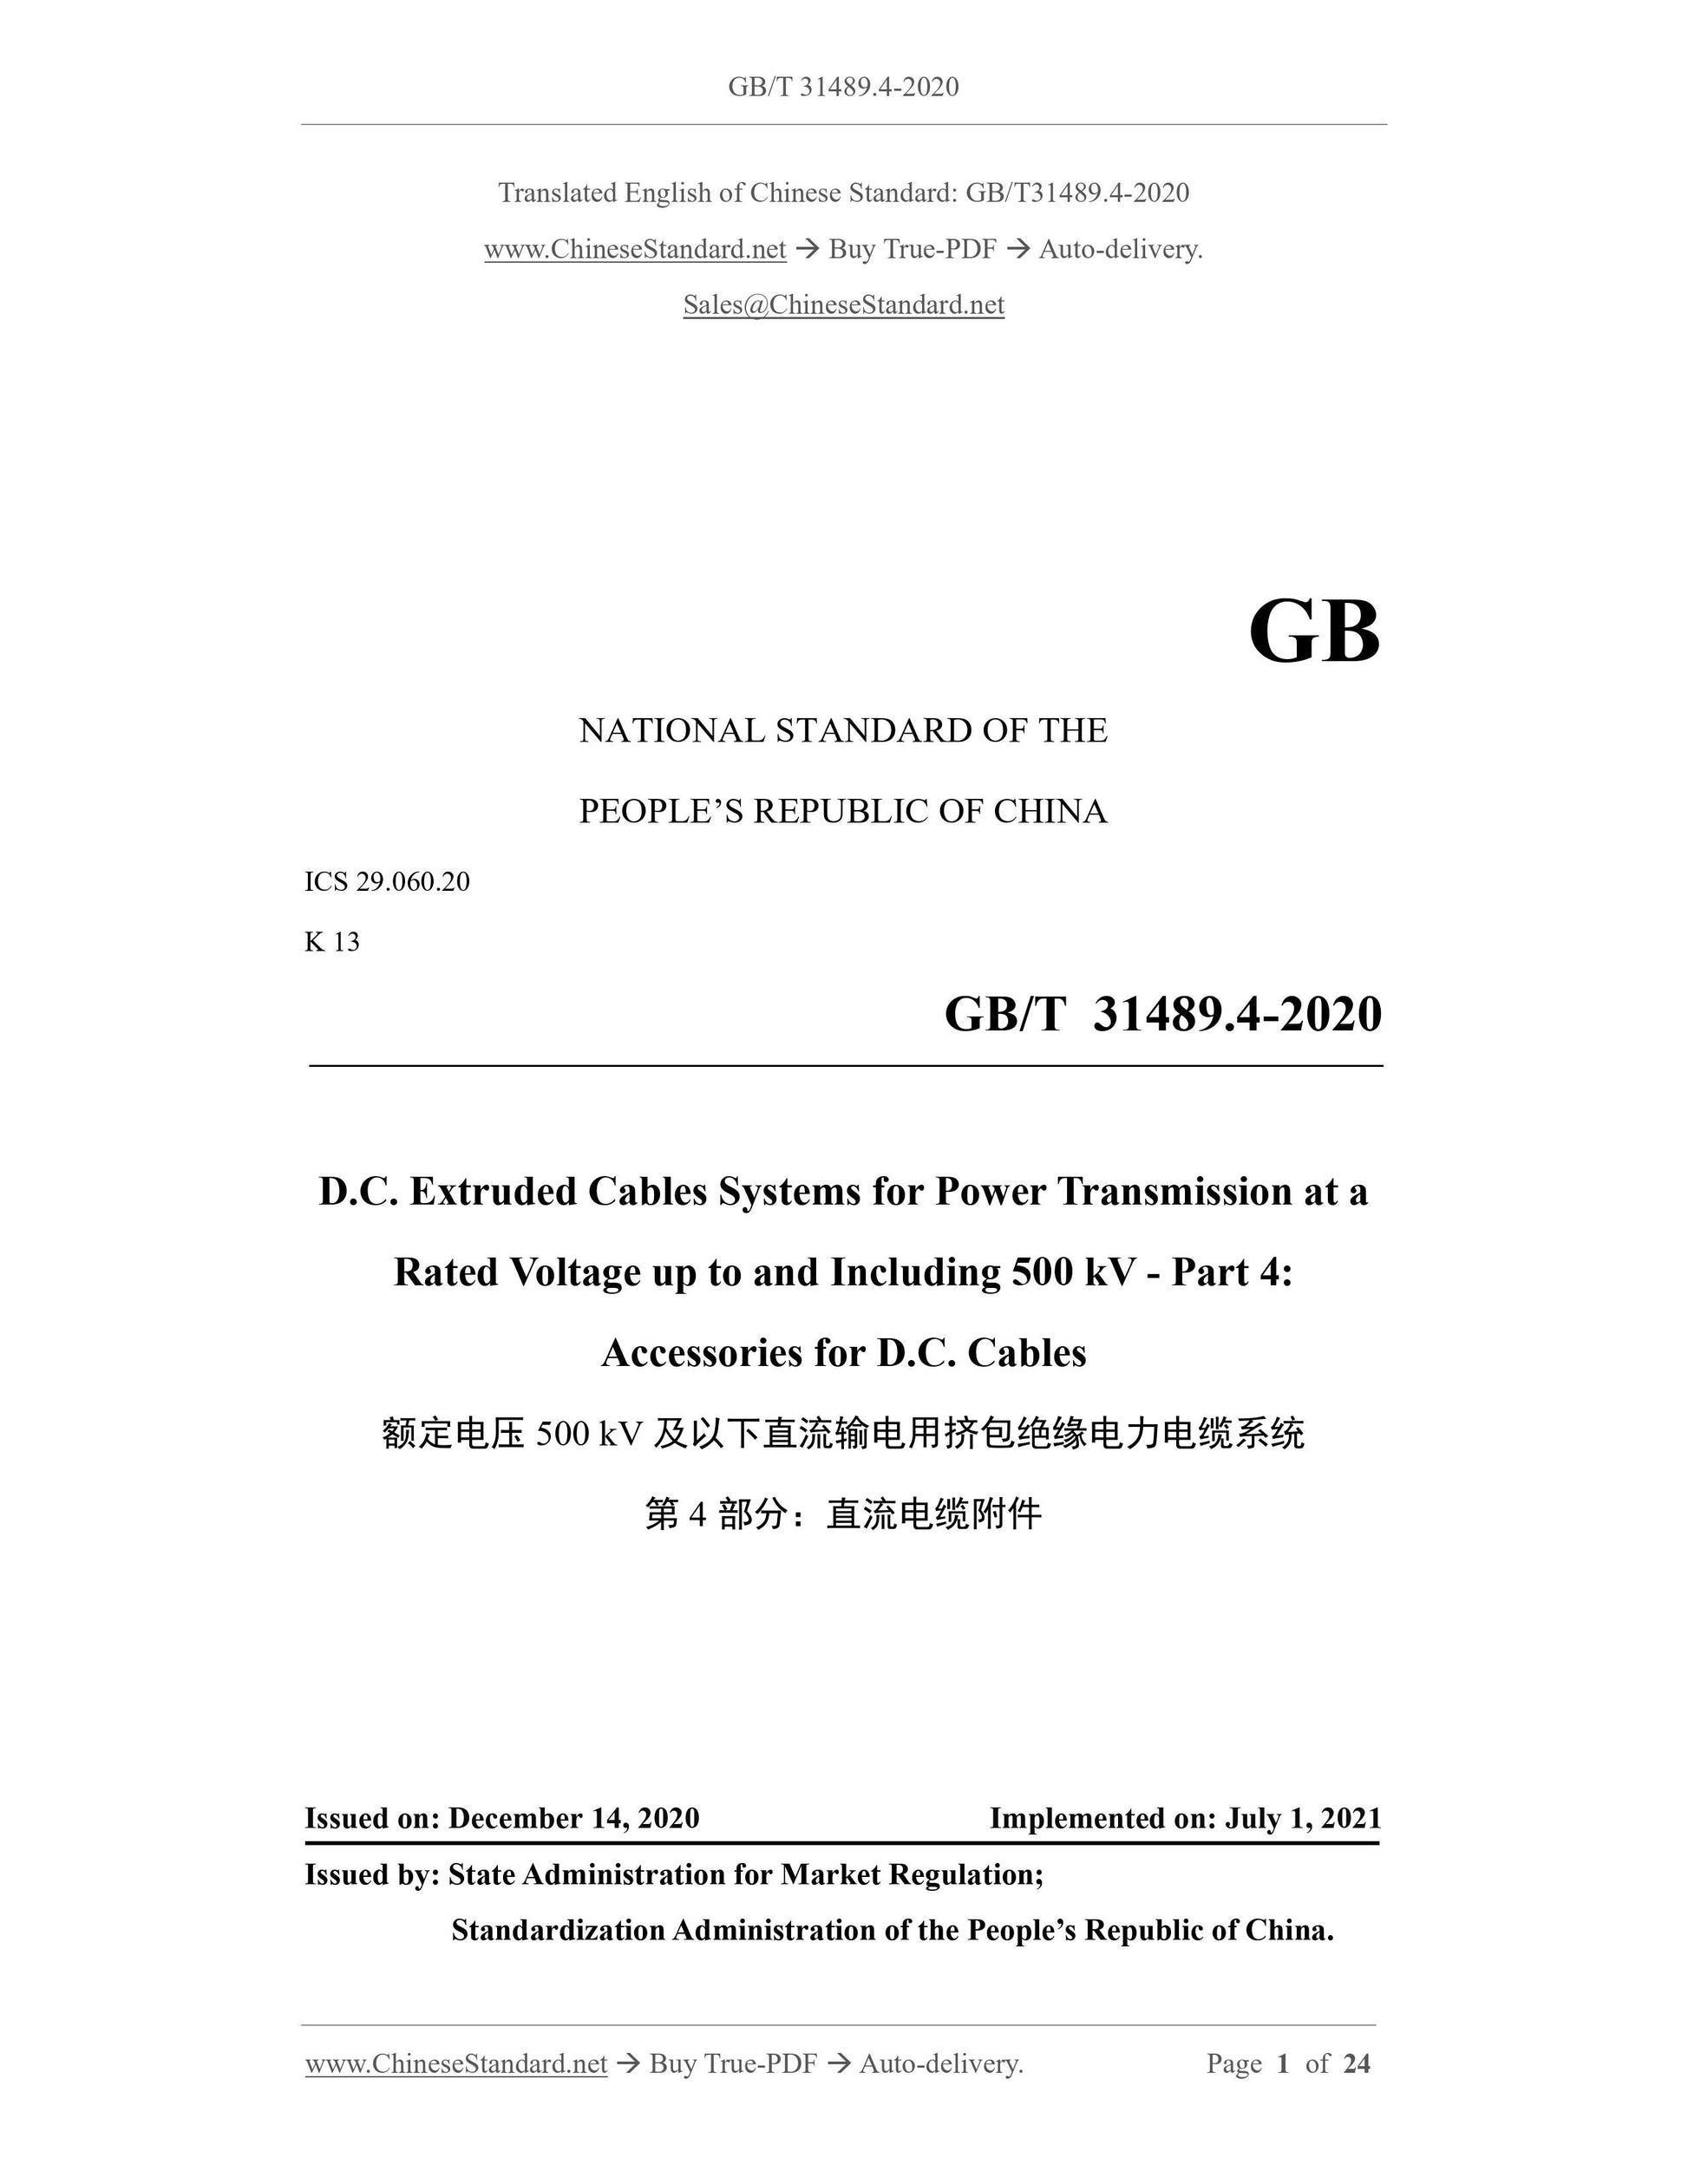 GB/T 31489.4-2020 Page 1